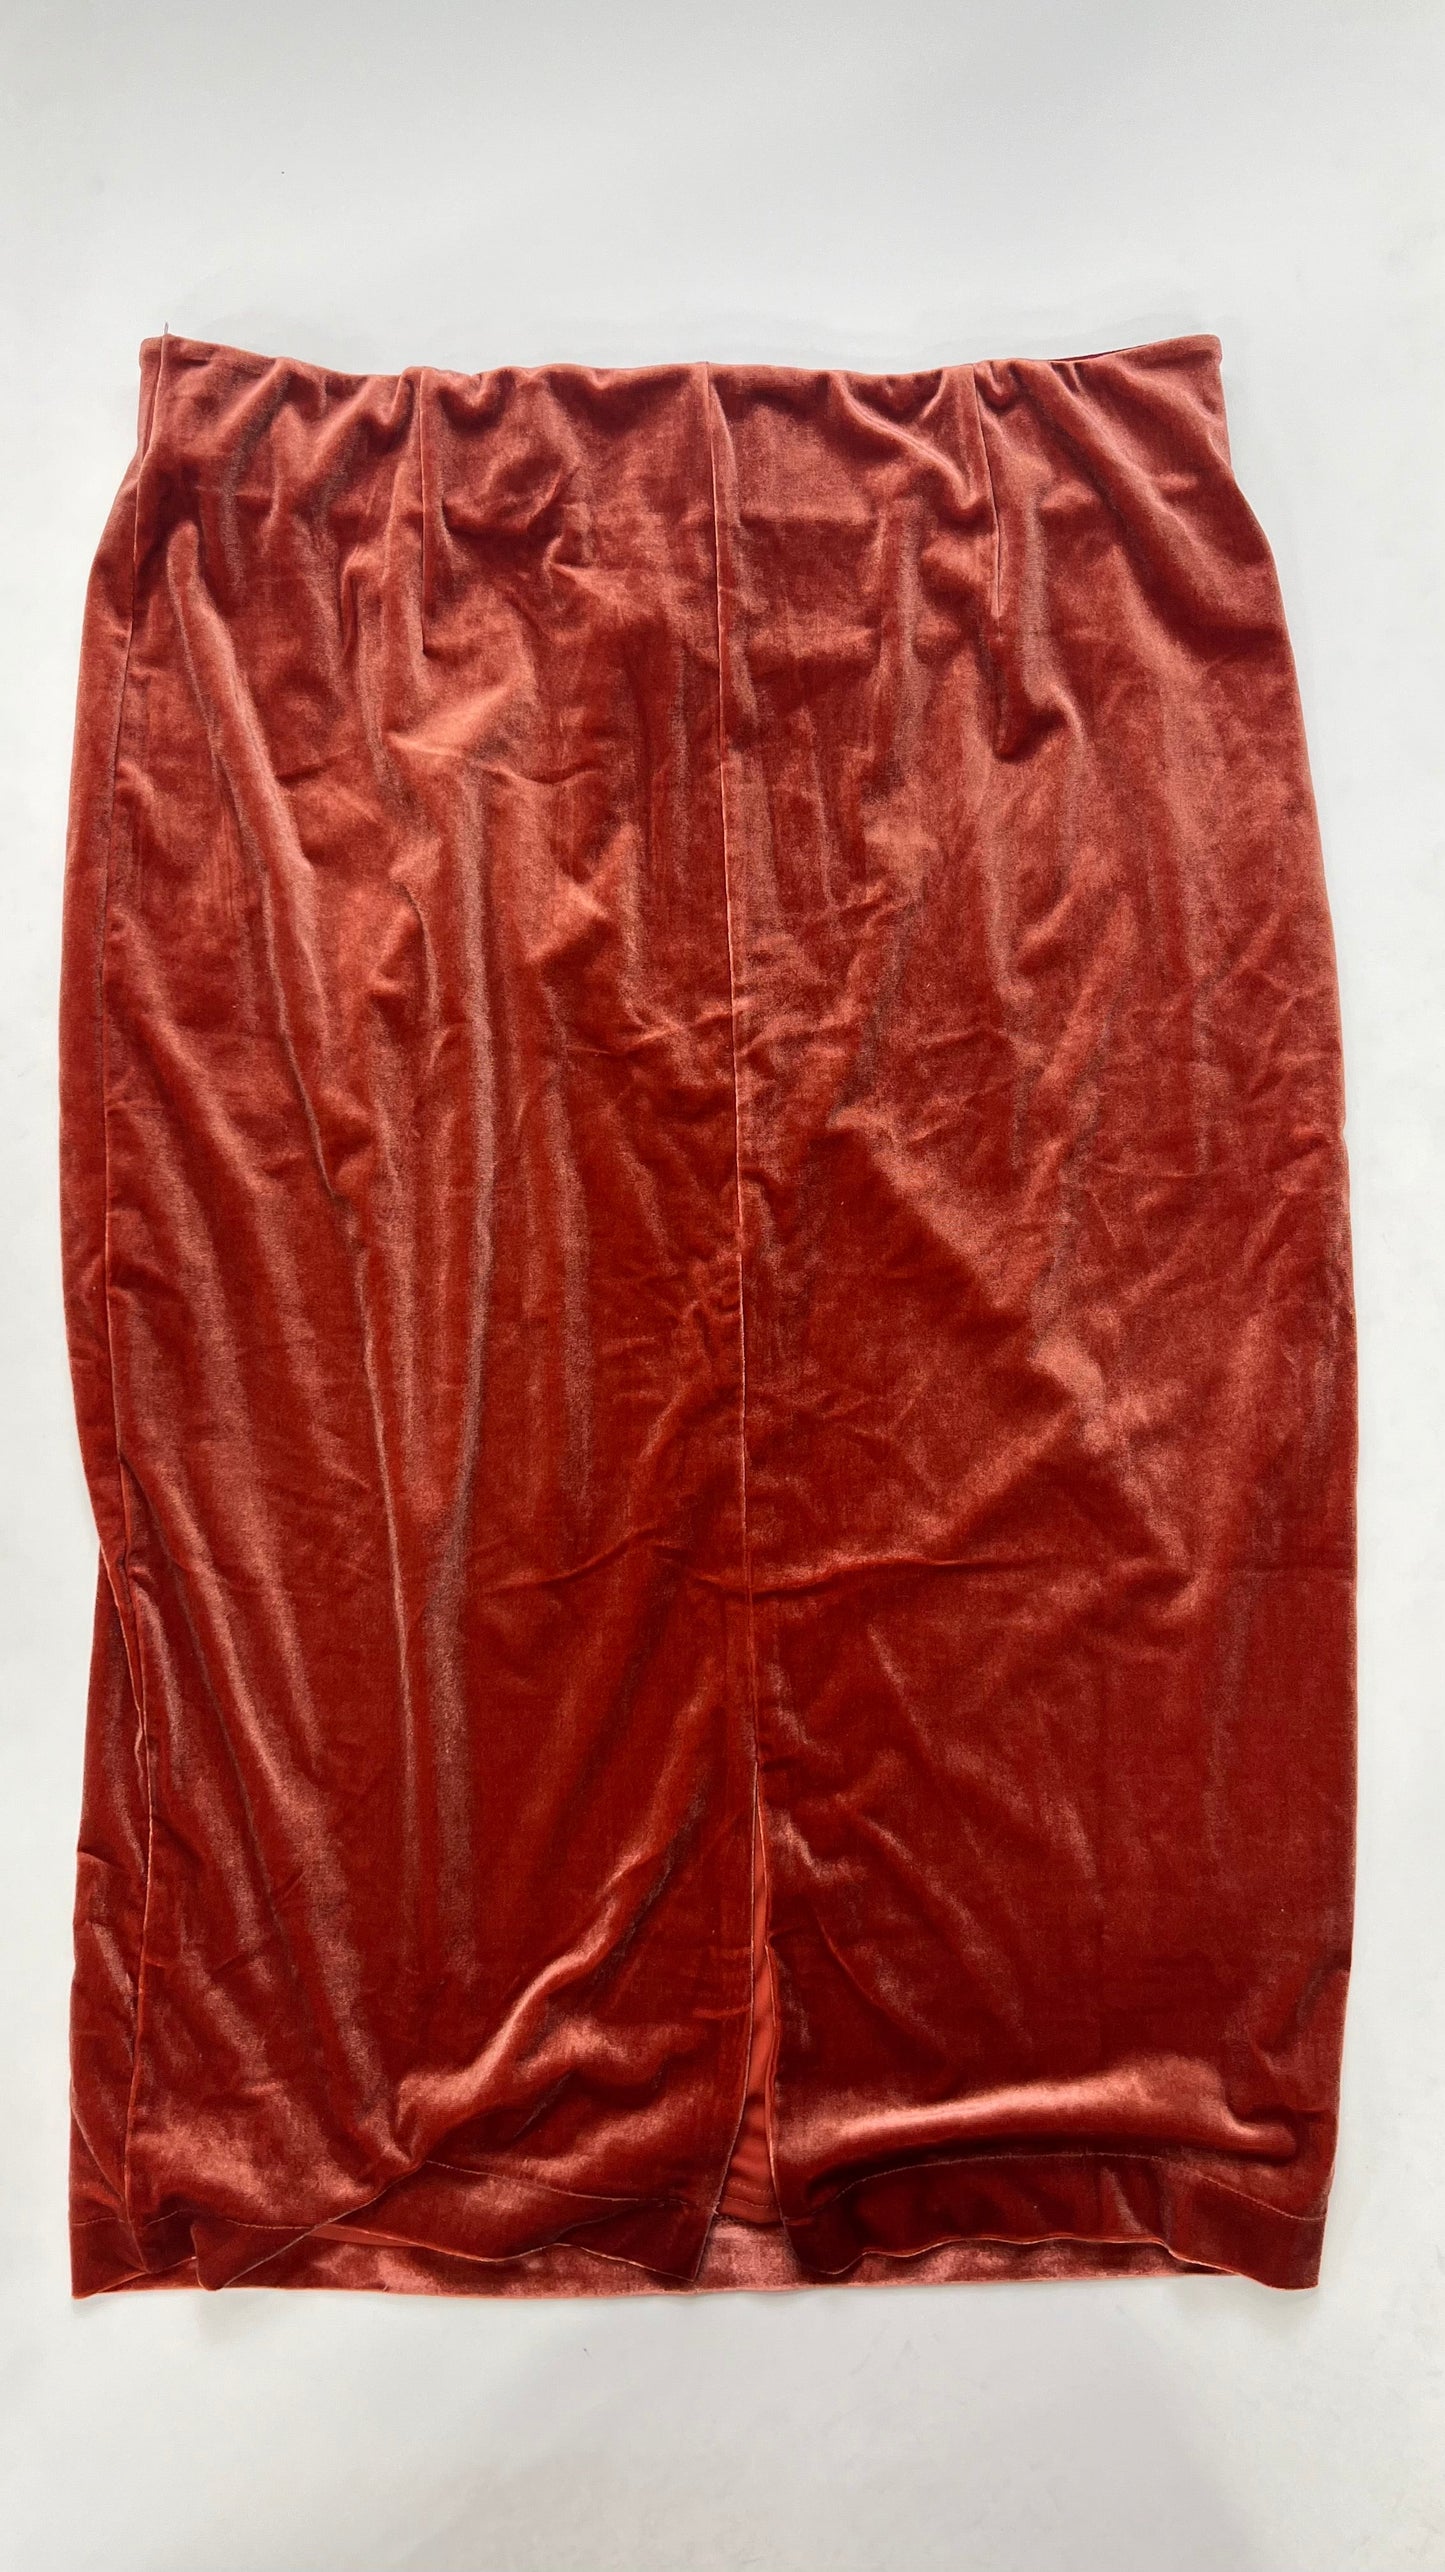 Rust Skirt Maxi New York And Co, Size Xl